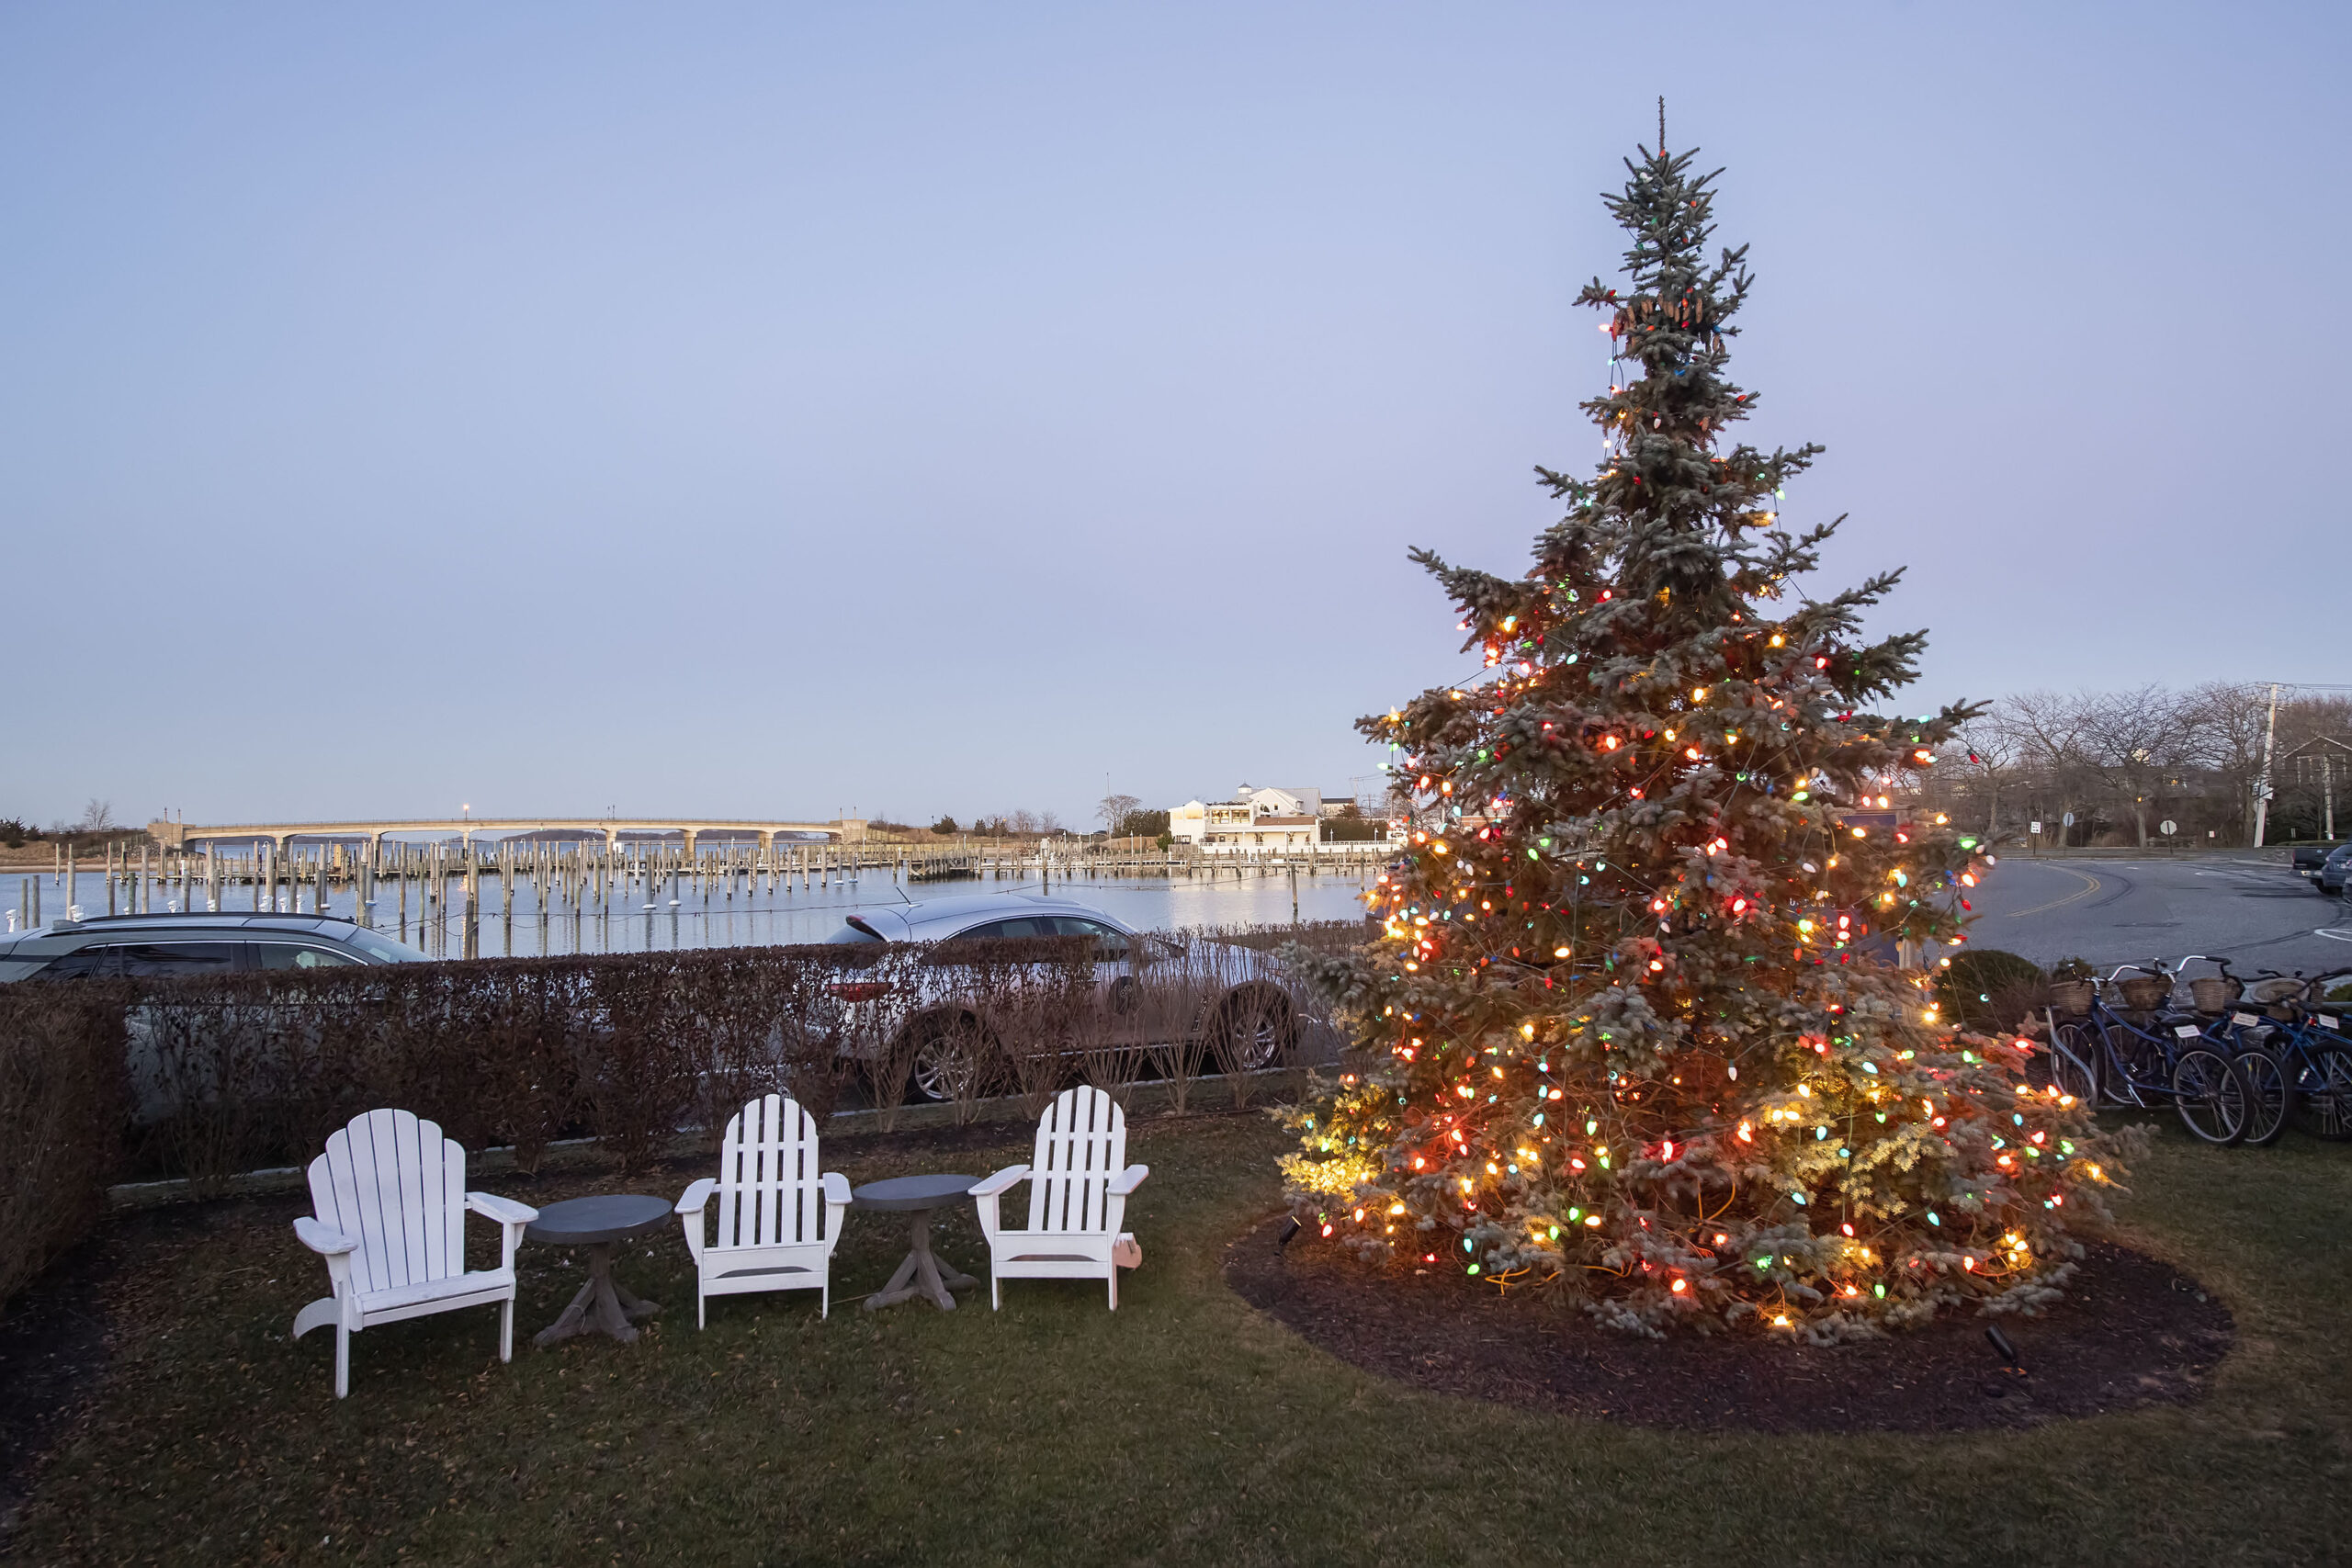 Baron's Cove decked out for the holidays. MICHAEL HELLER